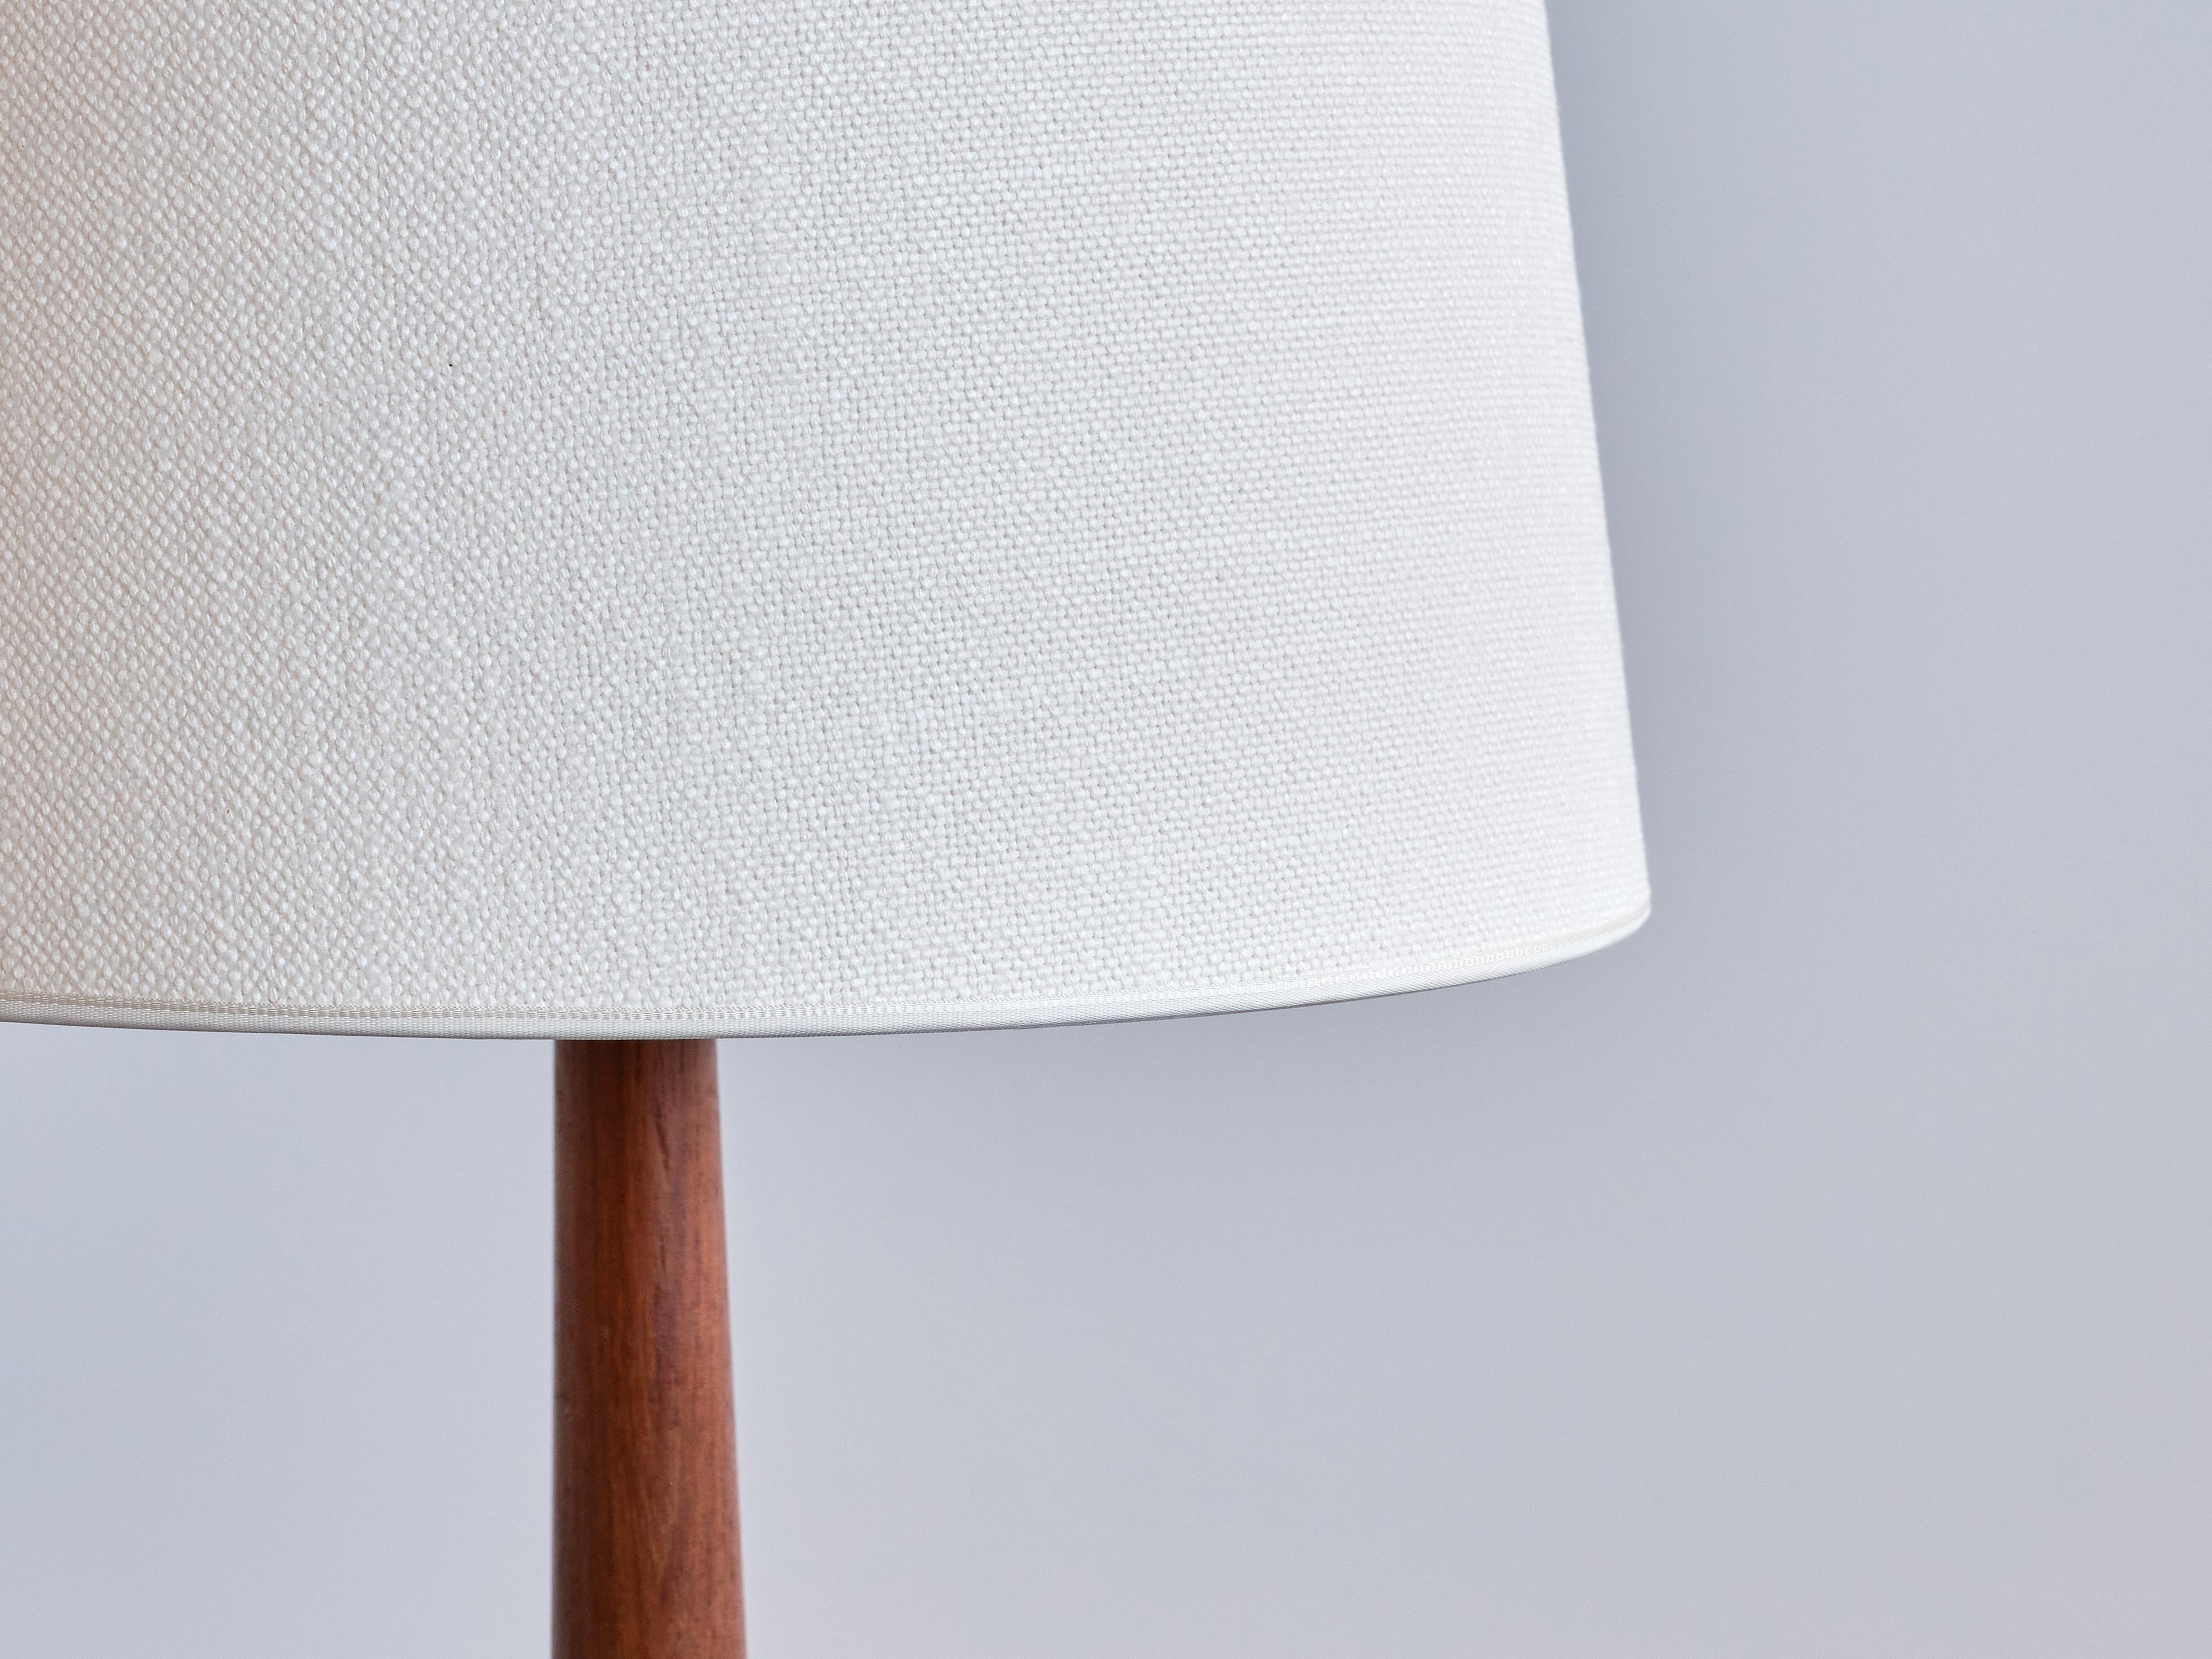 Fabric Tall Stilarmatur Tranås Table Lamp in Teak Wood with Cone Shade, Sweden, 1960s For Sale